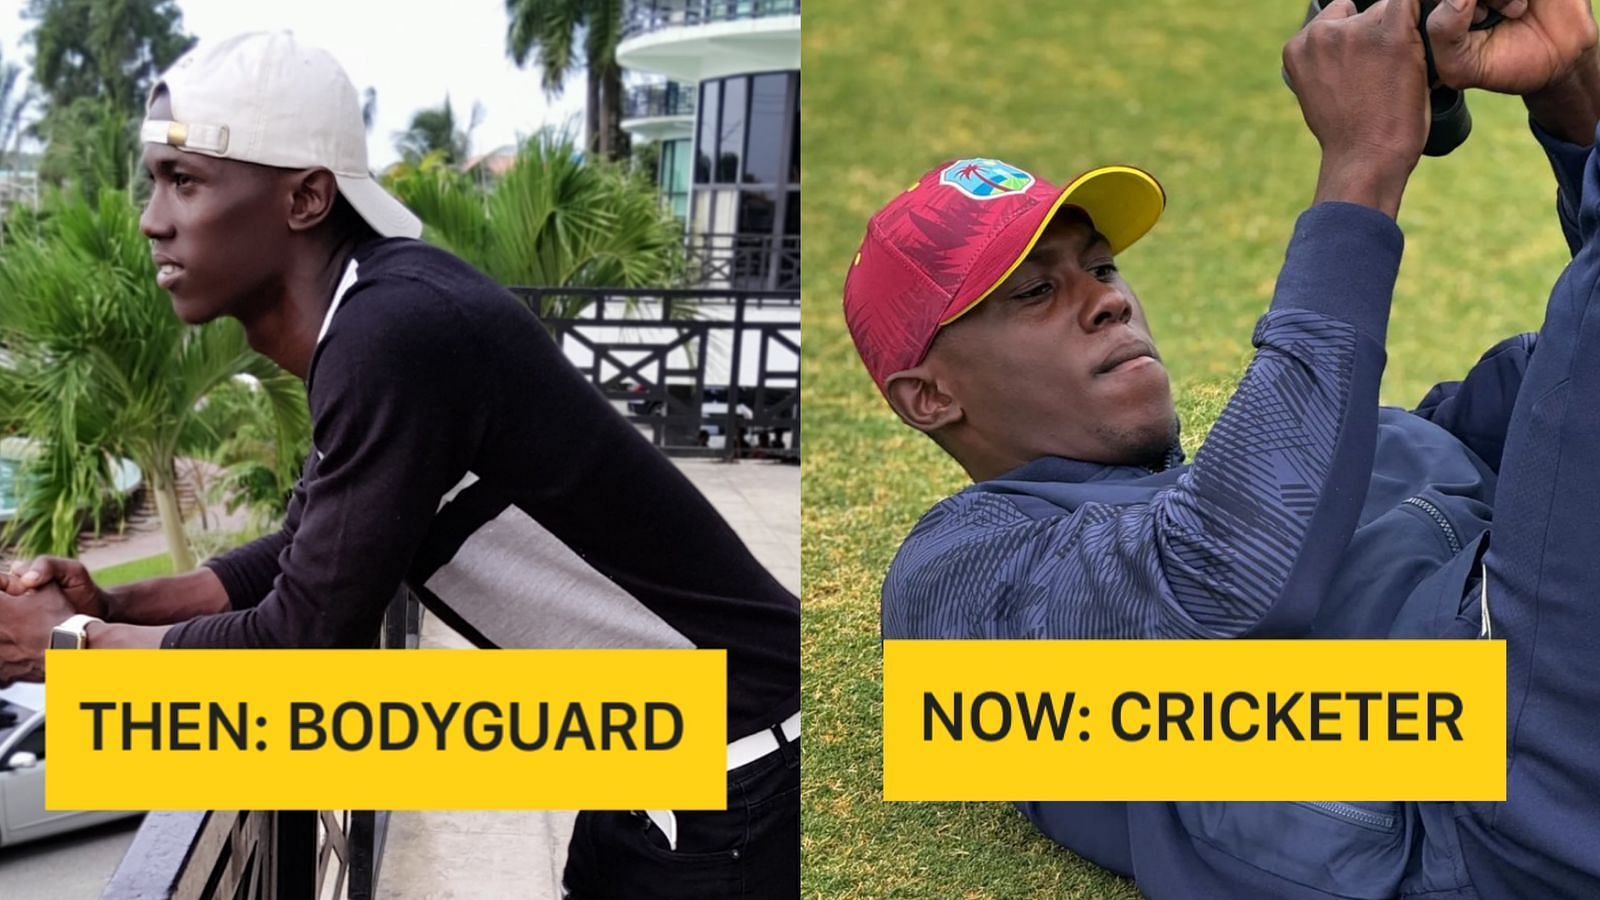 Shamar Joseph worked as a bodyguard before debuting for West Indies (Image: Instagram)